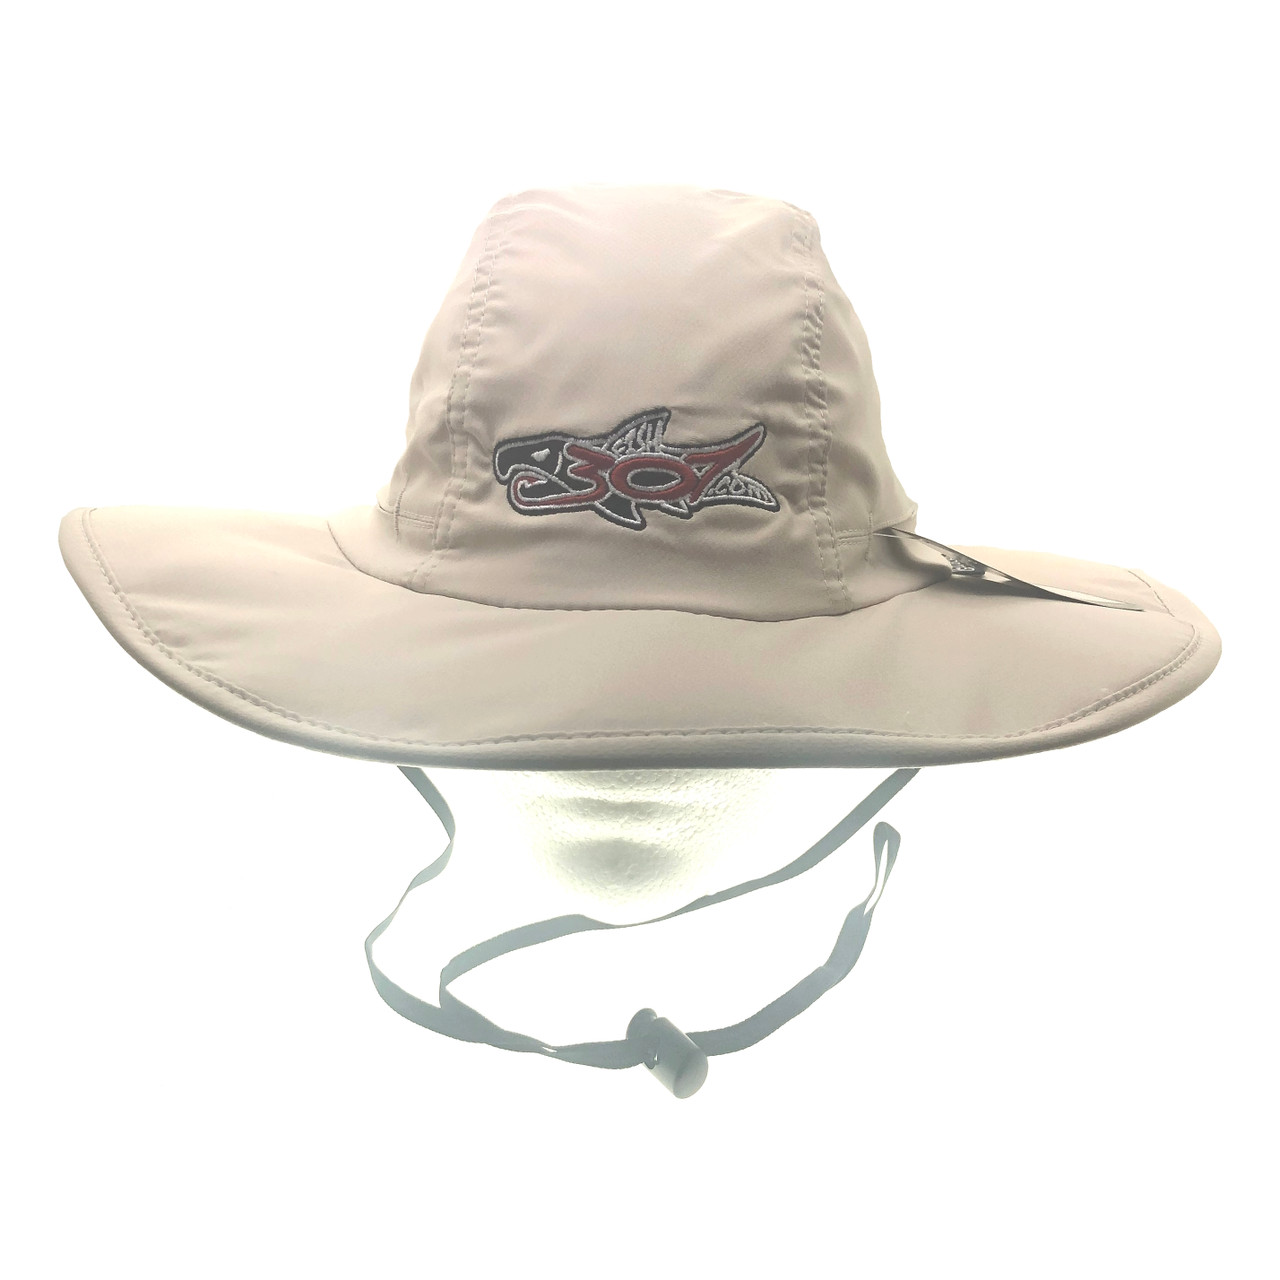 FISH307.com Embroidered Moisture Wicking Polyester Boonie Hat / Cap -  FISH307.com